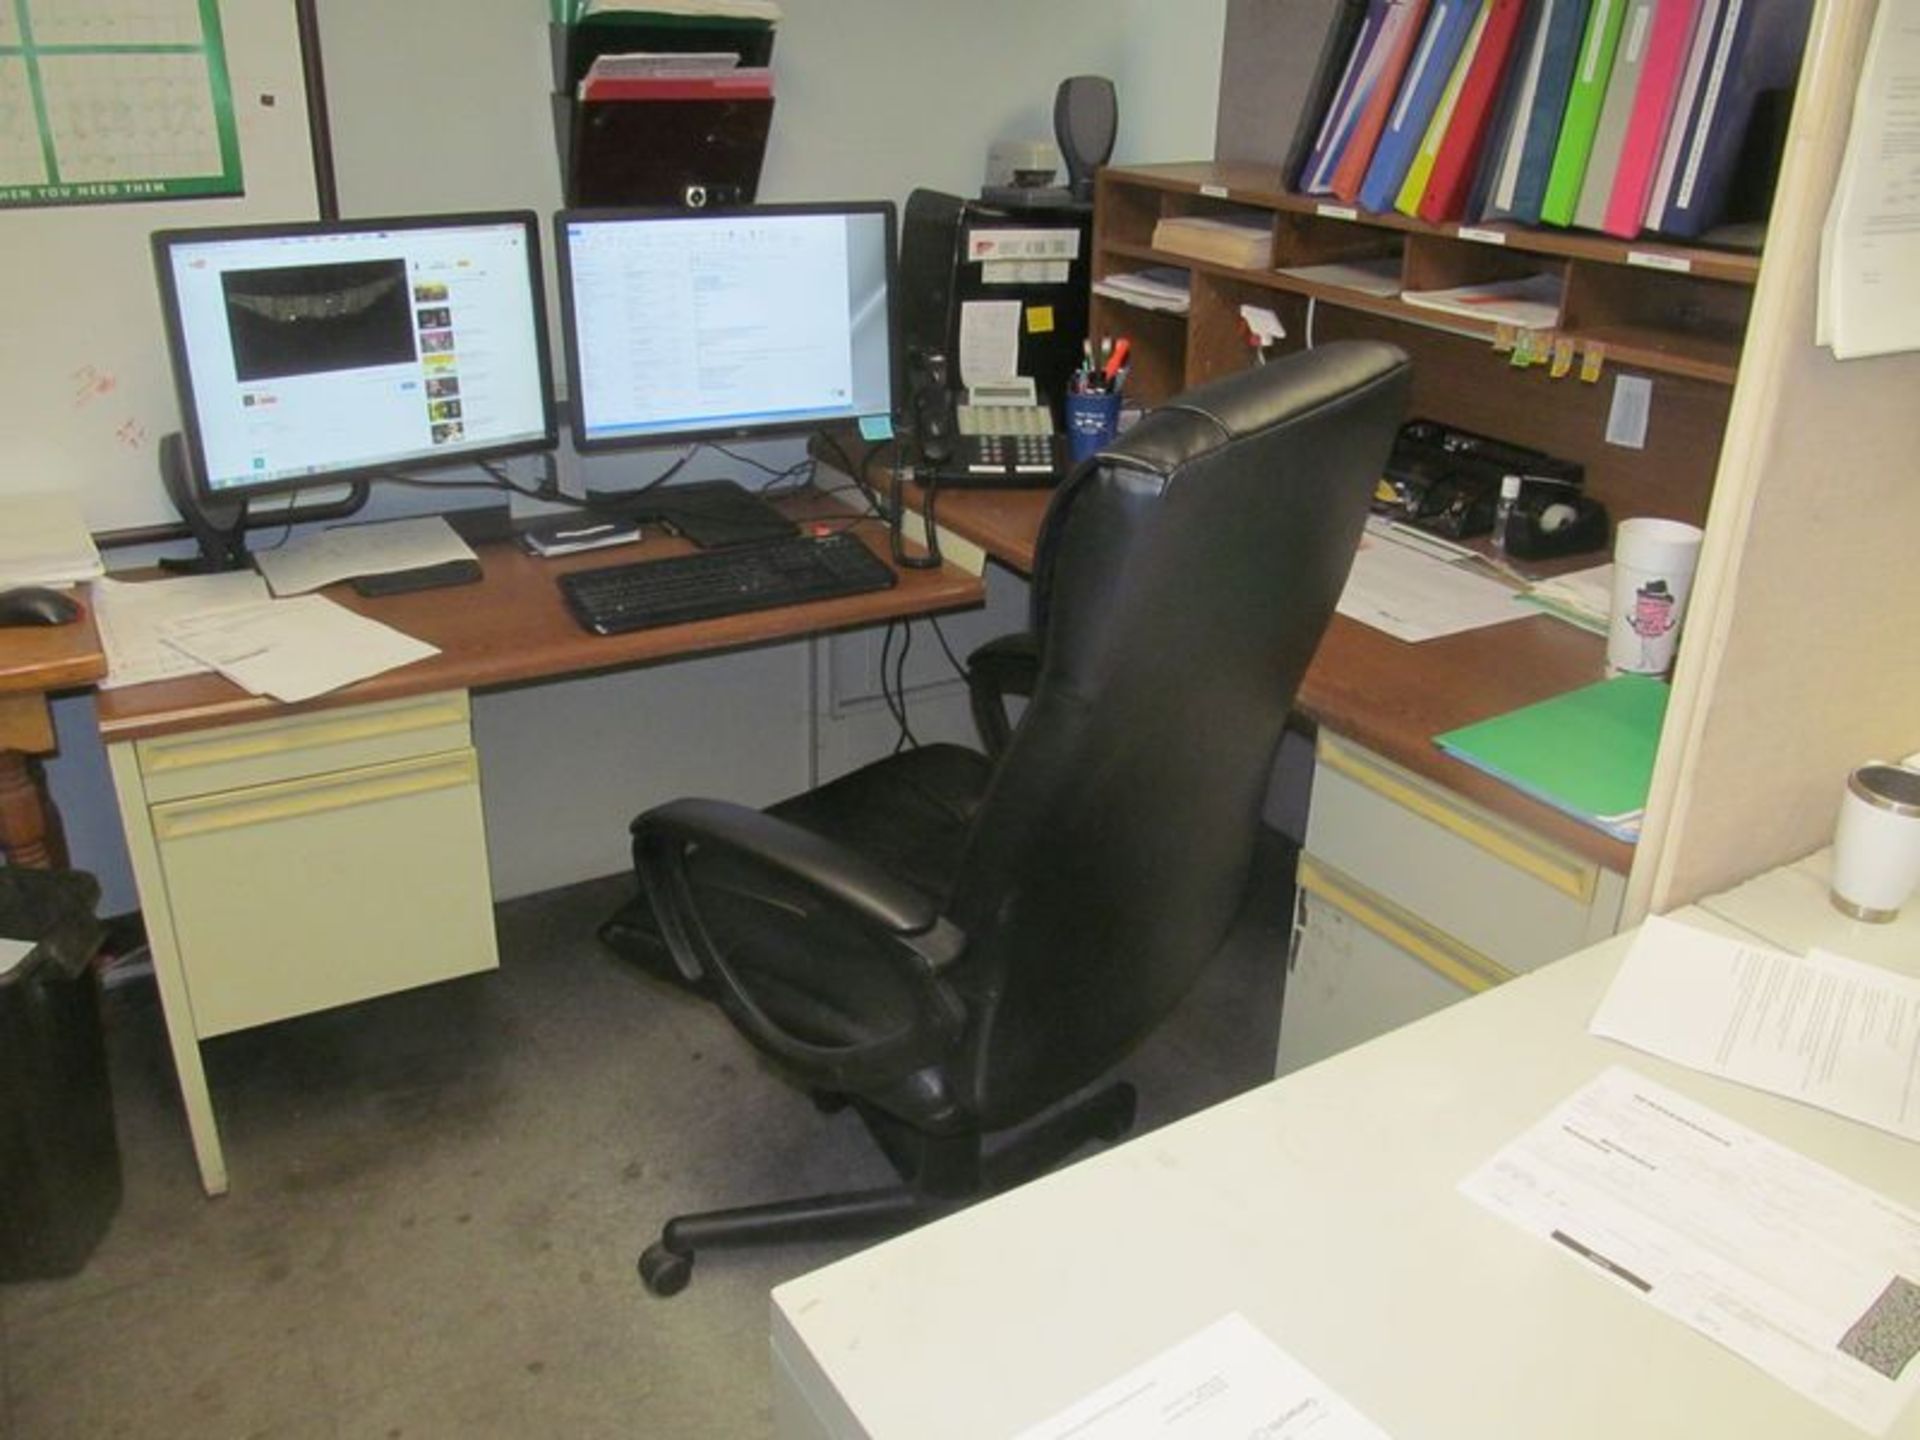 Lot of assorted office furniture including (2) desks, (2) chairs, partitions, etc. - Image 2 of 2